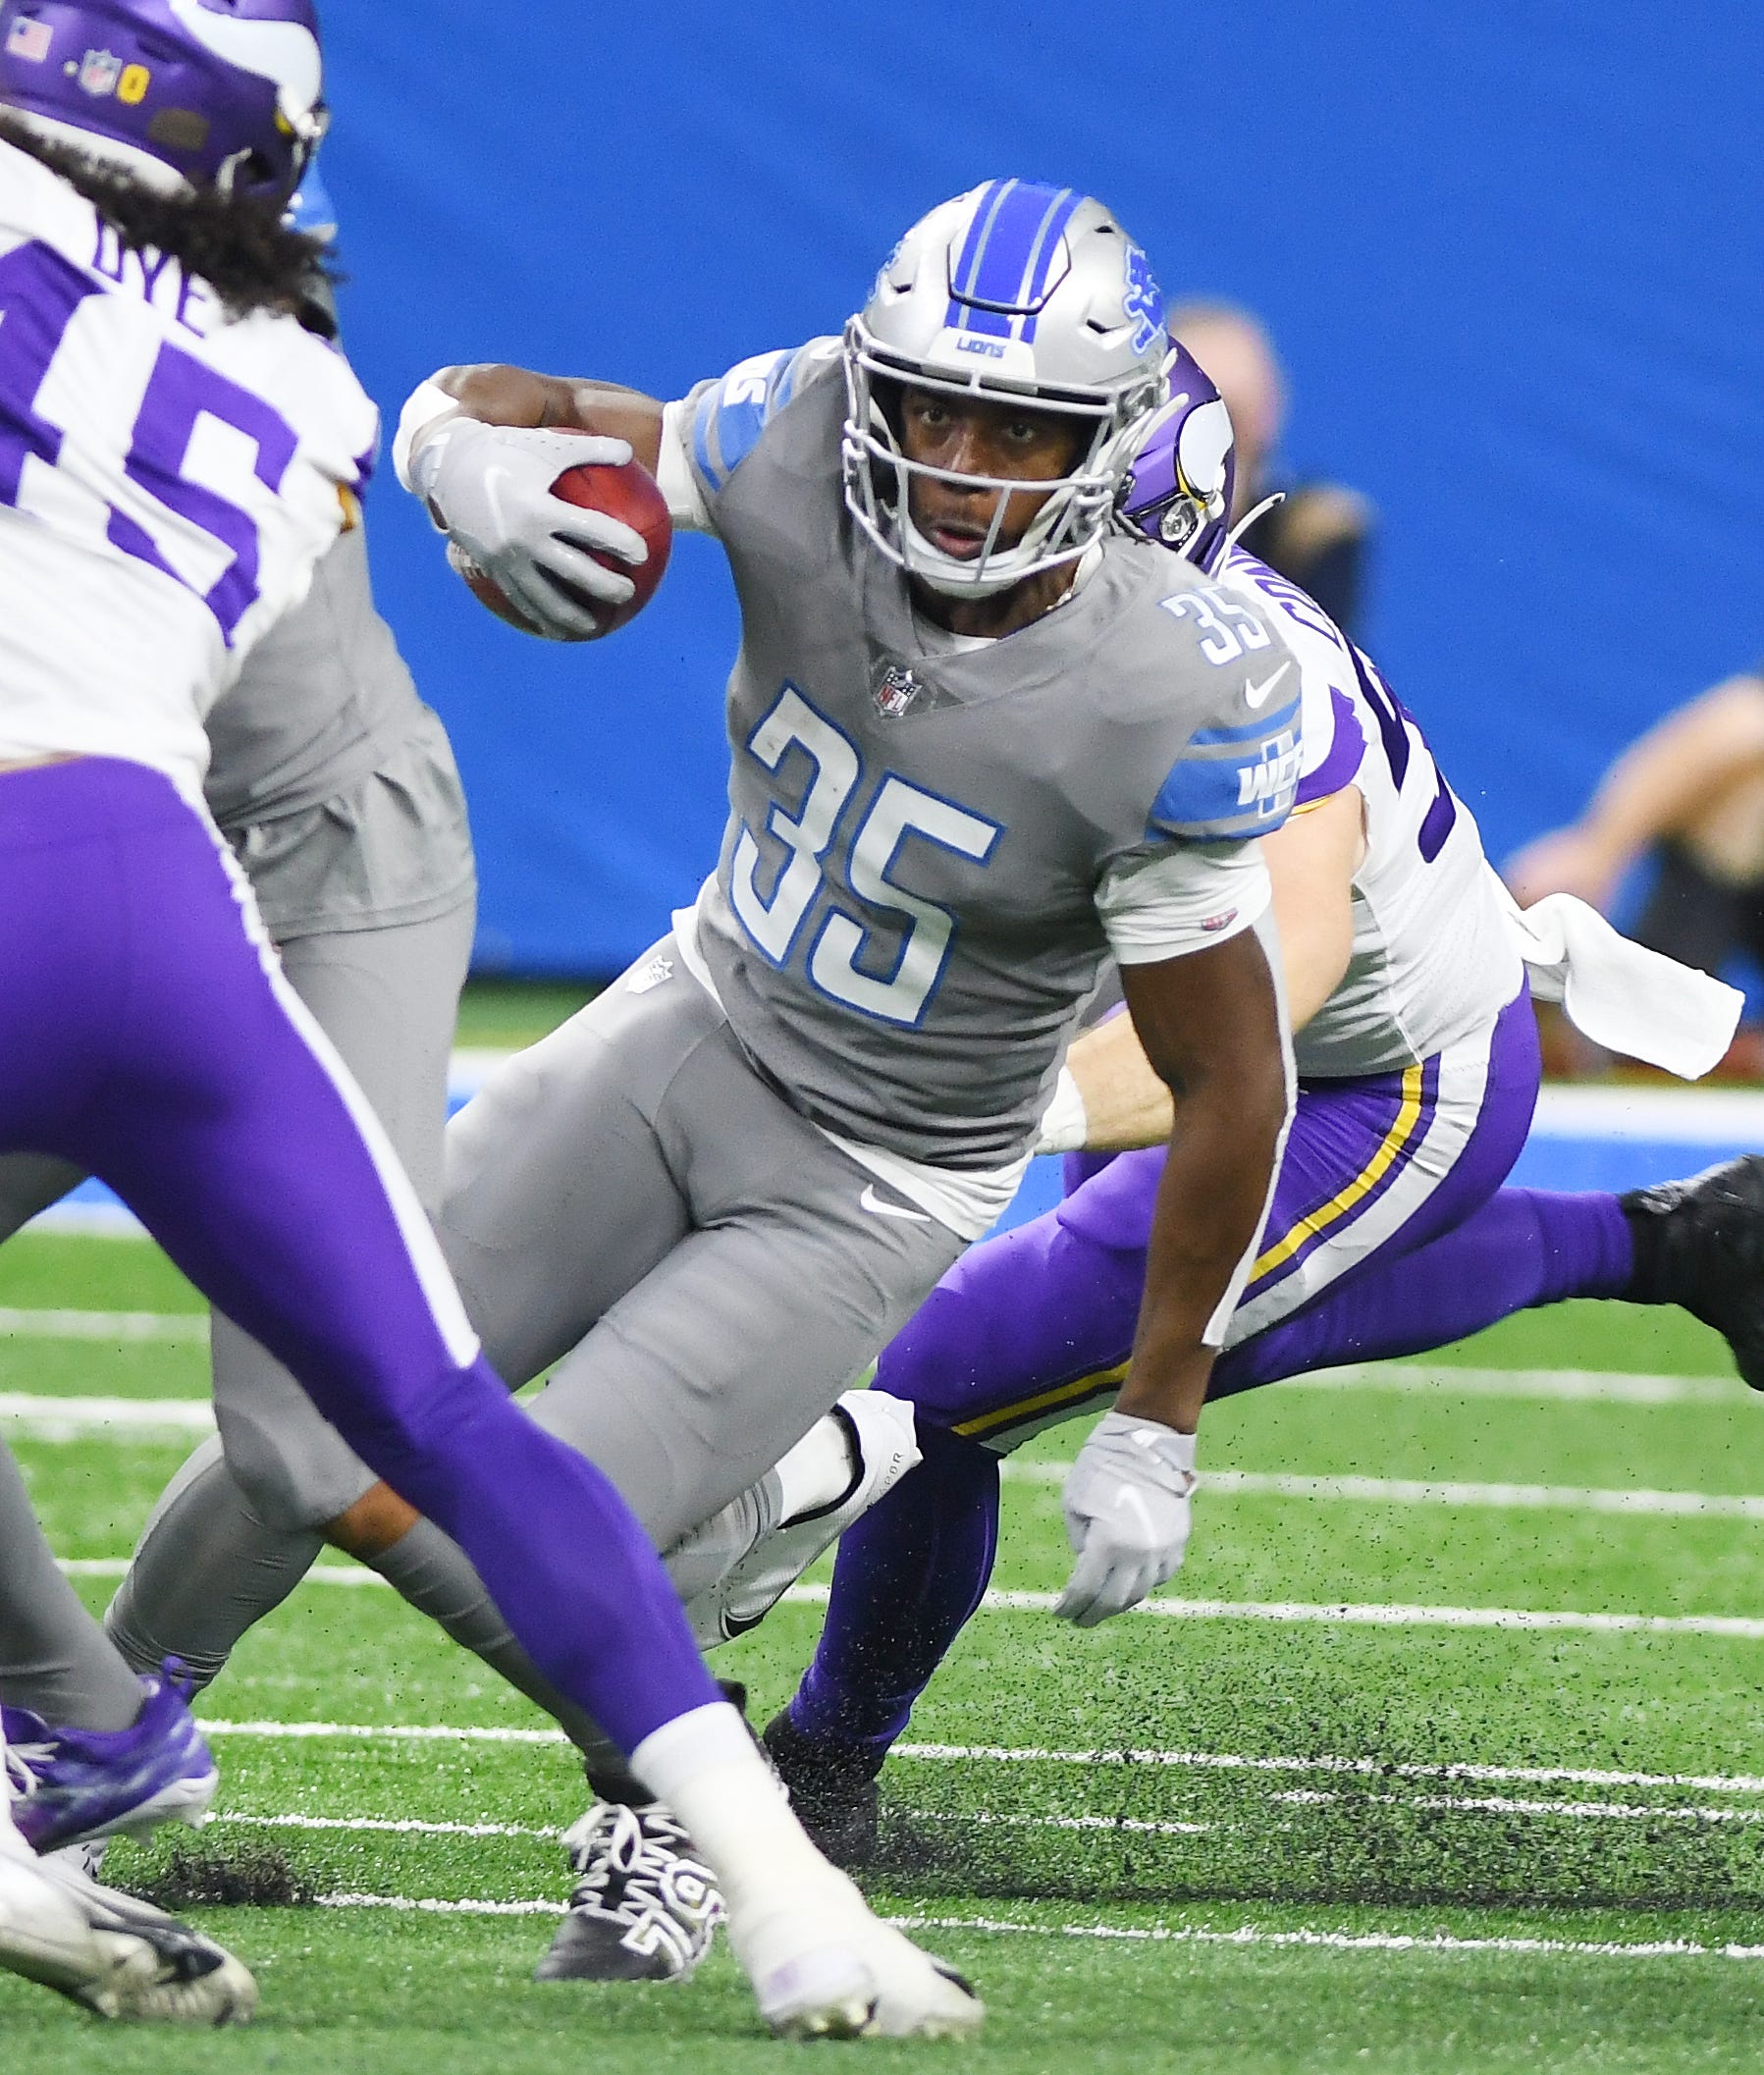 Lions running back Godwin Igwebuike heads up field on a run in the fist quarter Sunday against the Vikings.